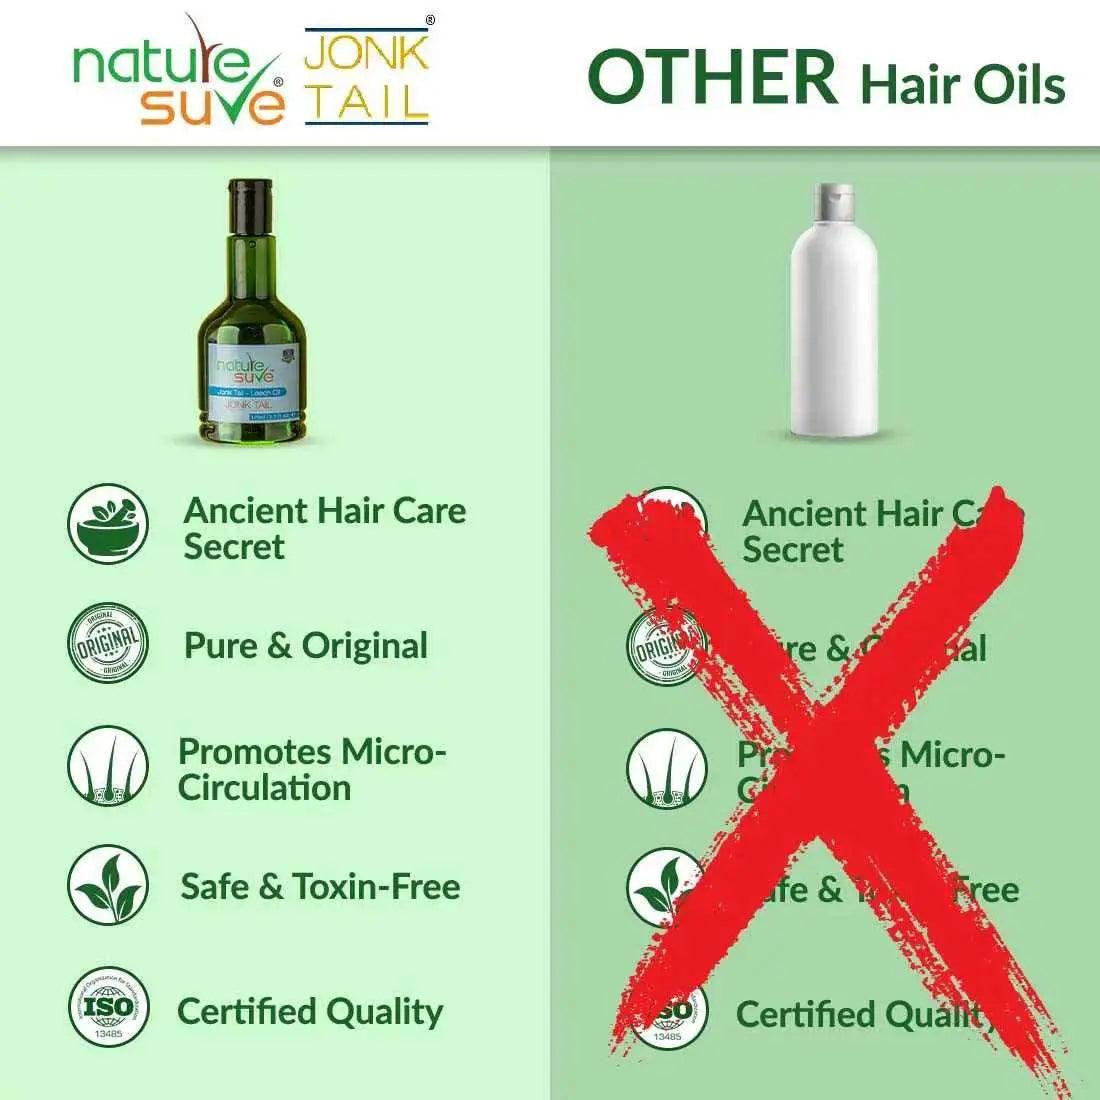 Nature Sure Jonk Tail for Hair Problems in Men and Women - 110ml